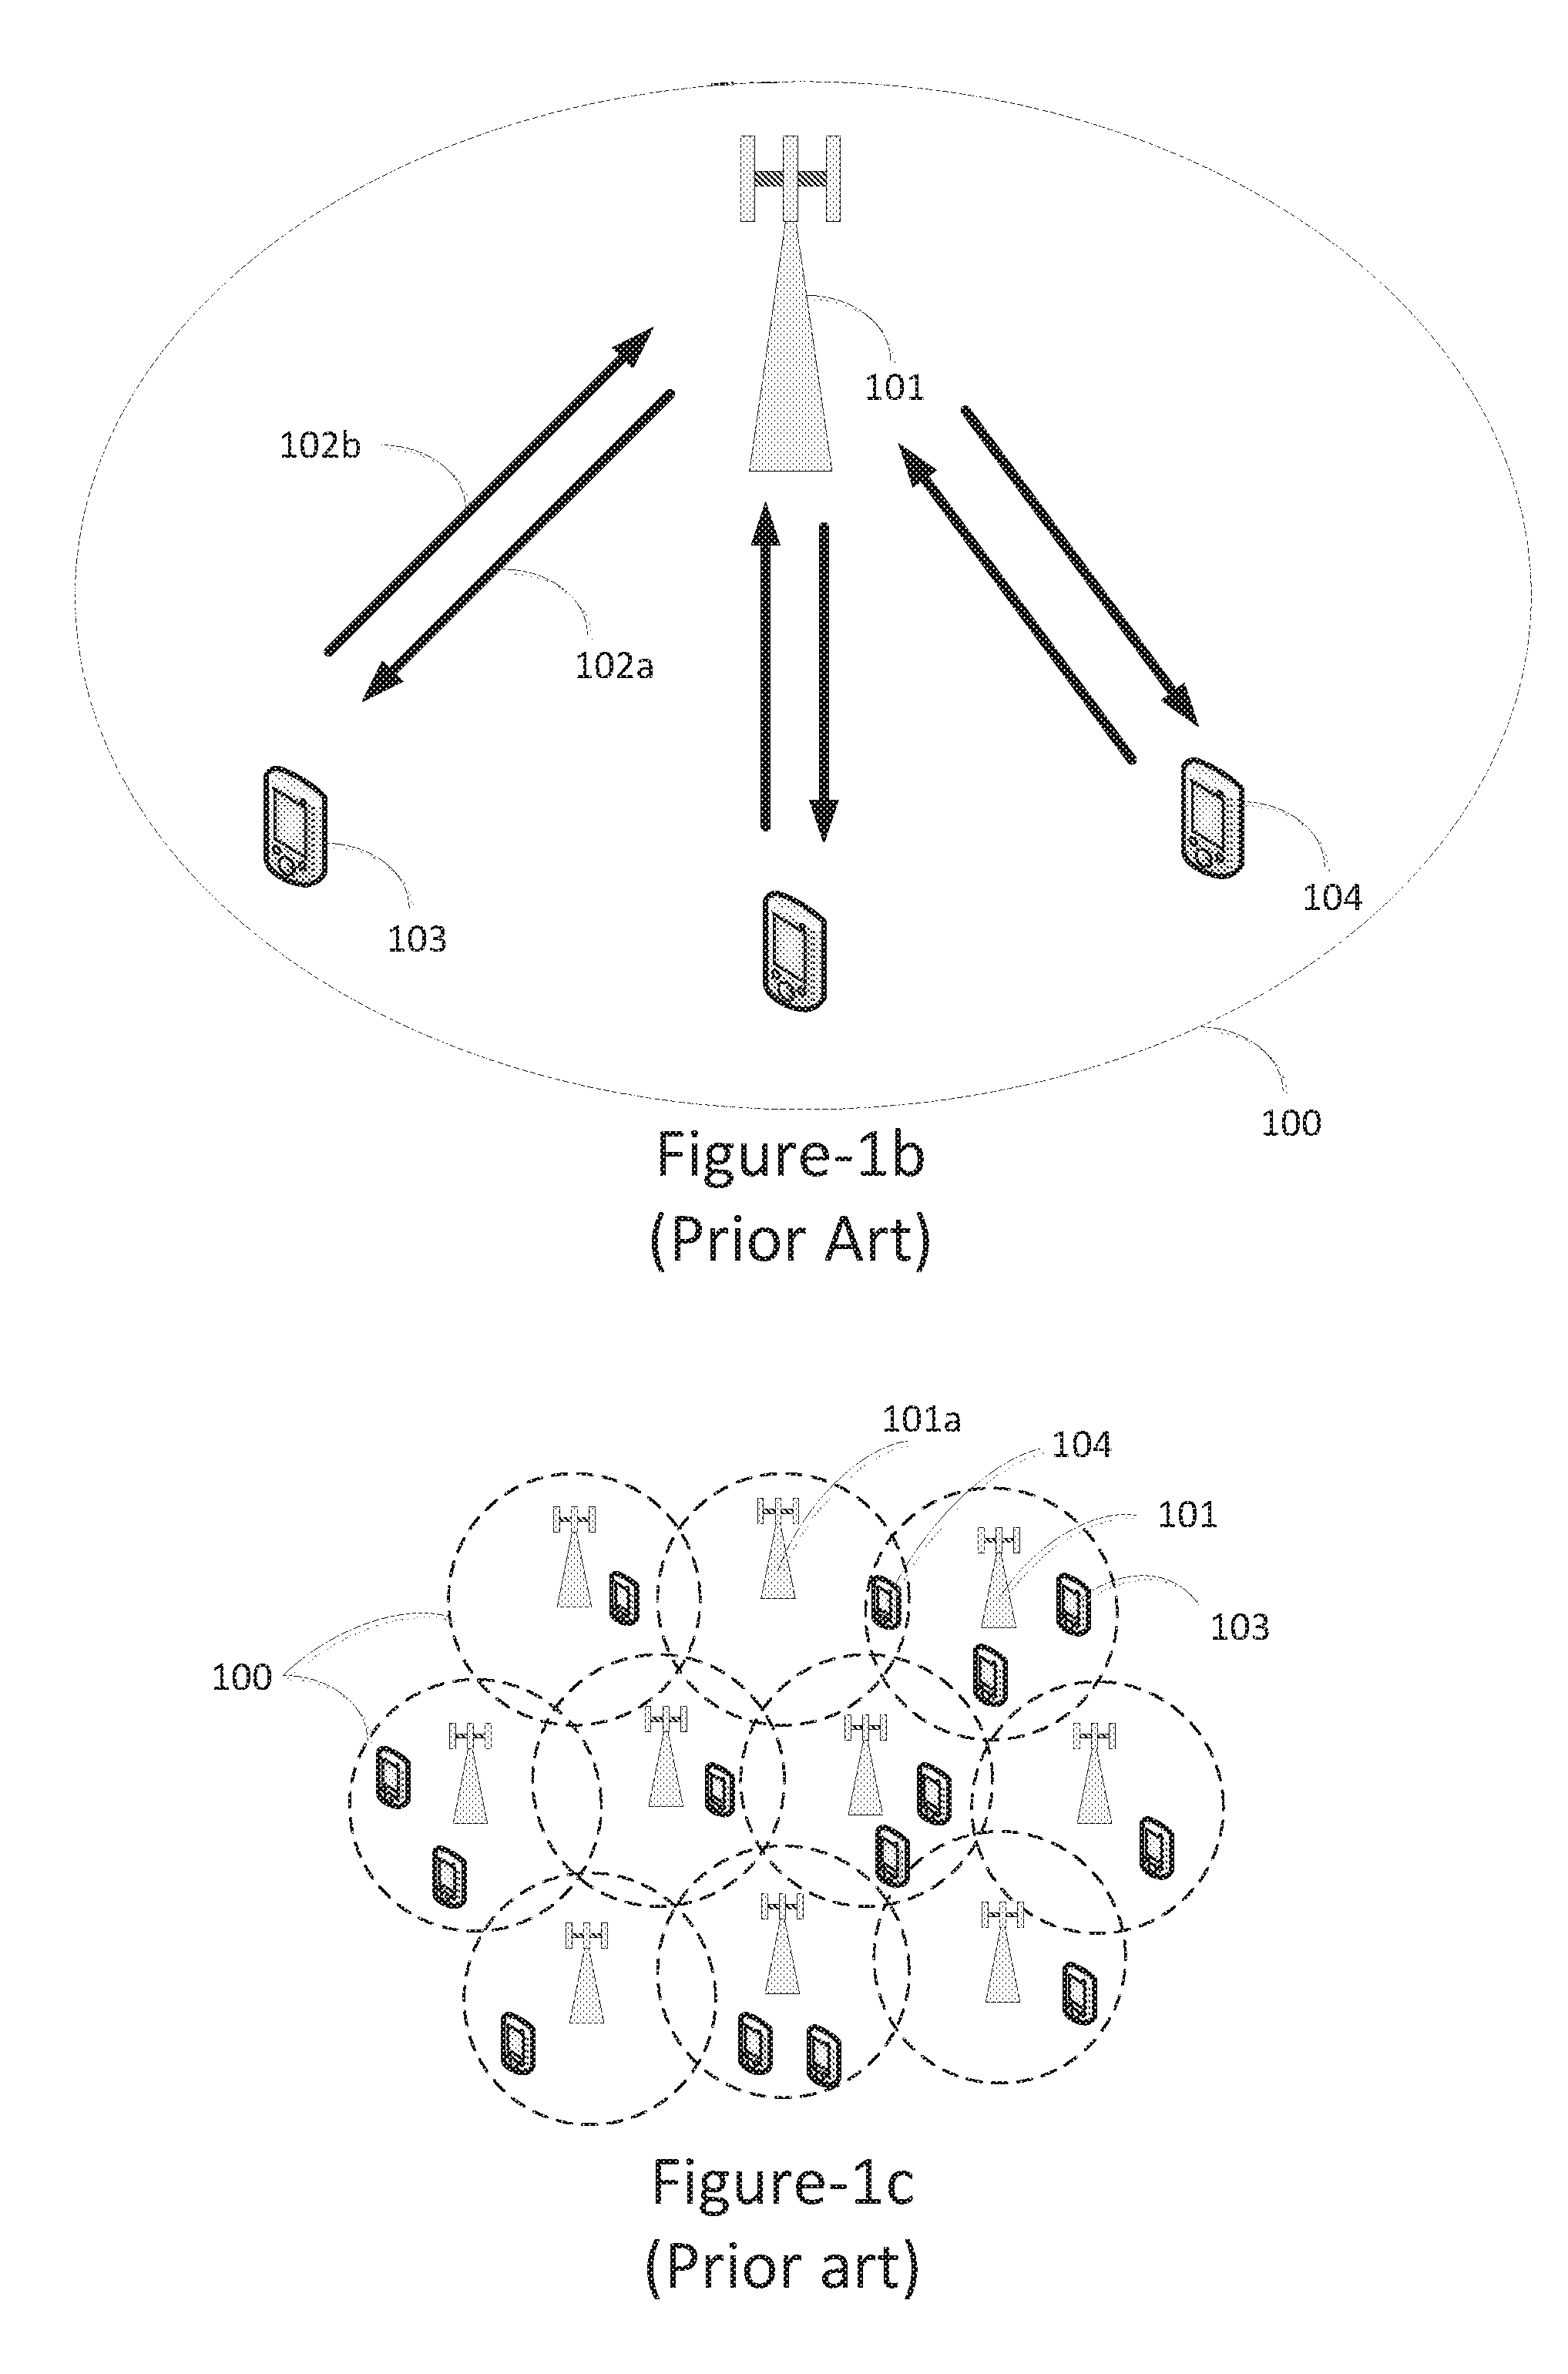 Add-on apparatus for synchronization of frequency diversity communications and methods useful in conjunction therewith